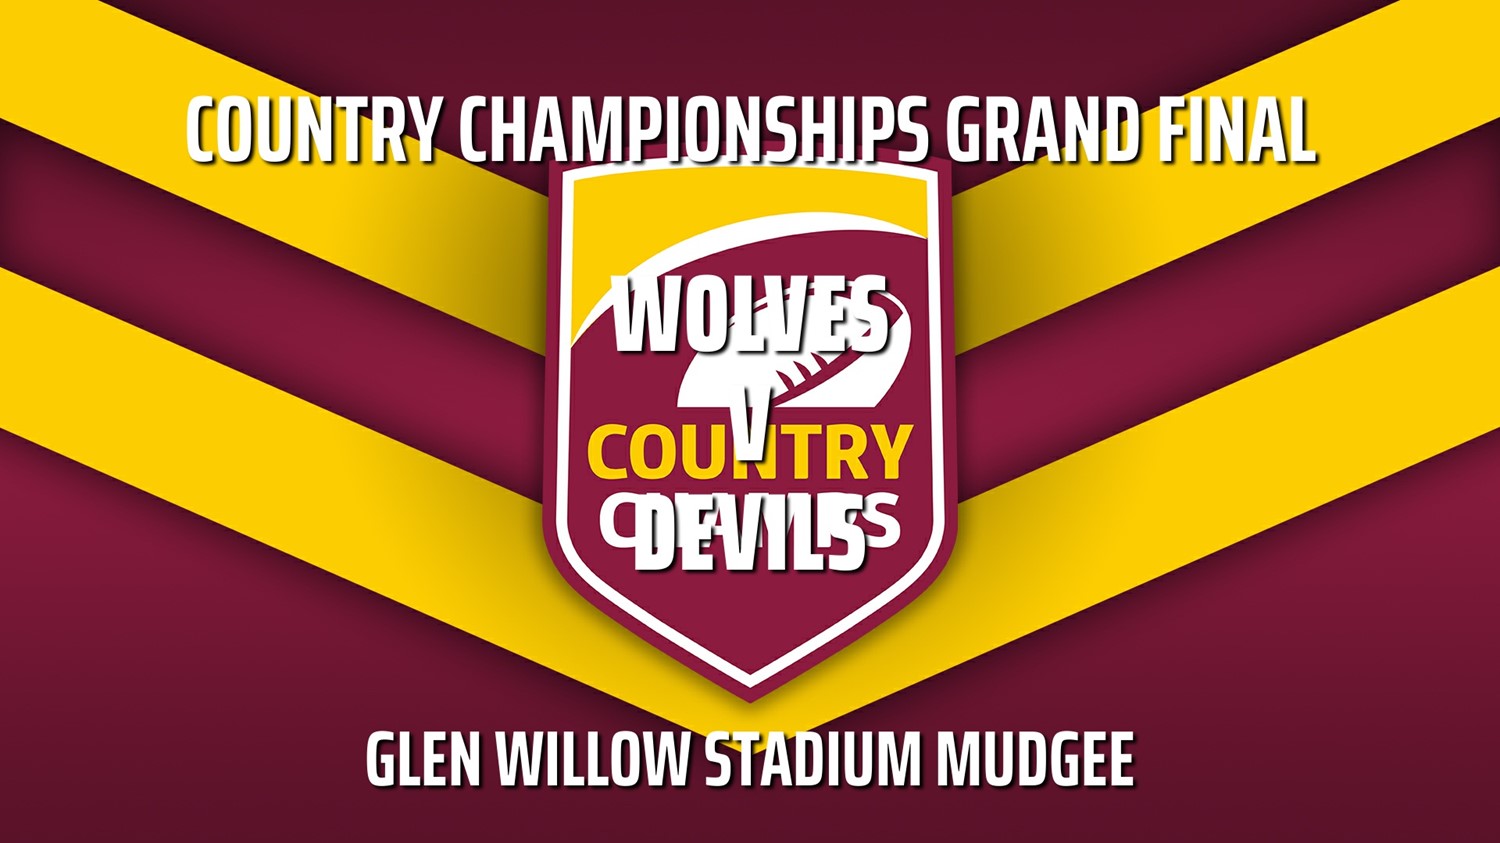 231015-Country Championships Grand Final - Mixed Open - Wallsend Wolves v Wollongong Devils Minigame Slate Image